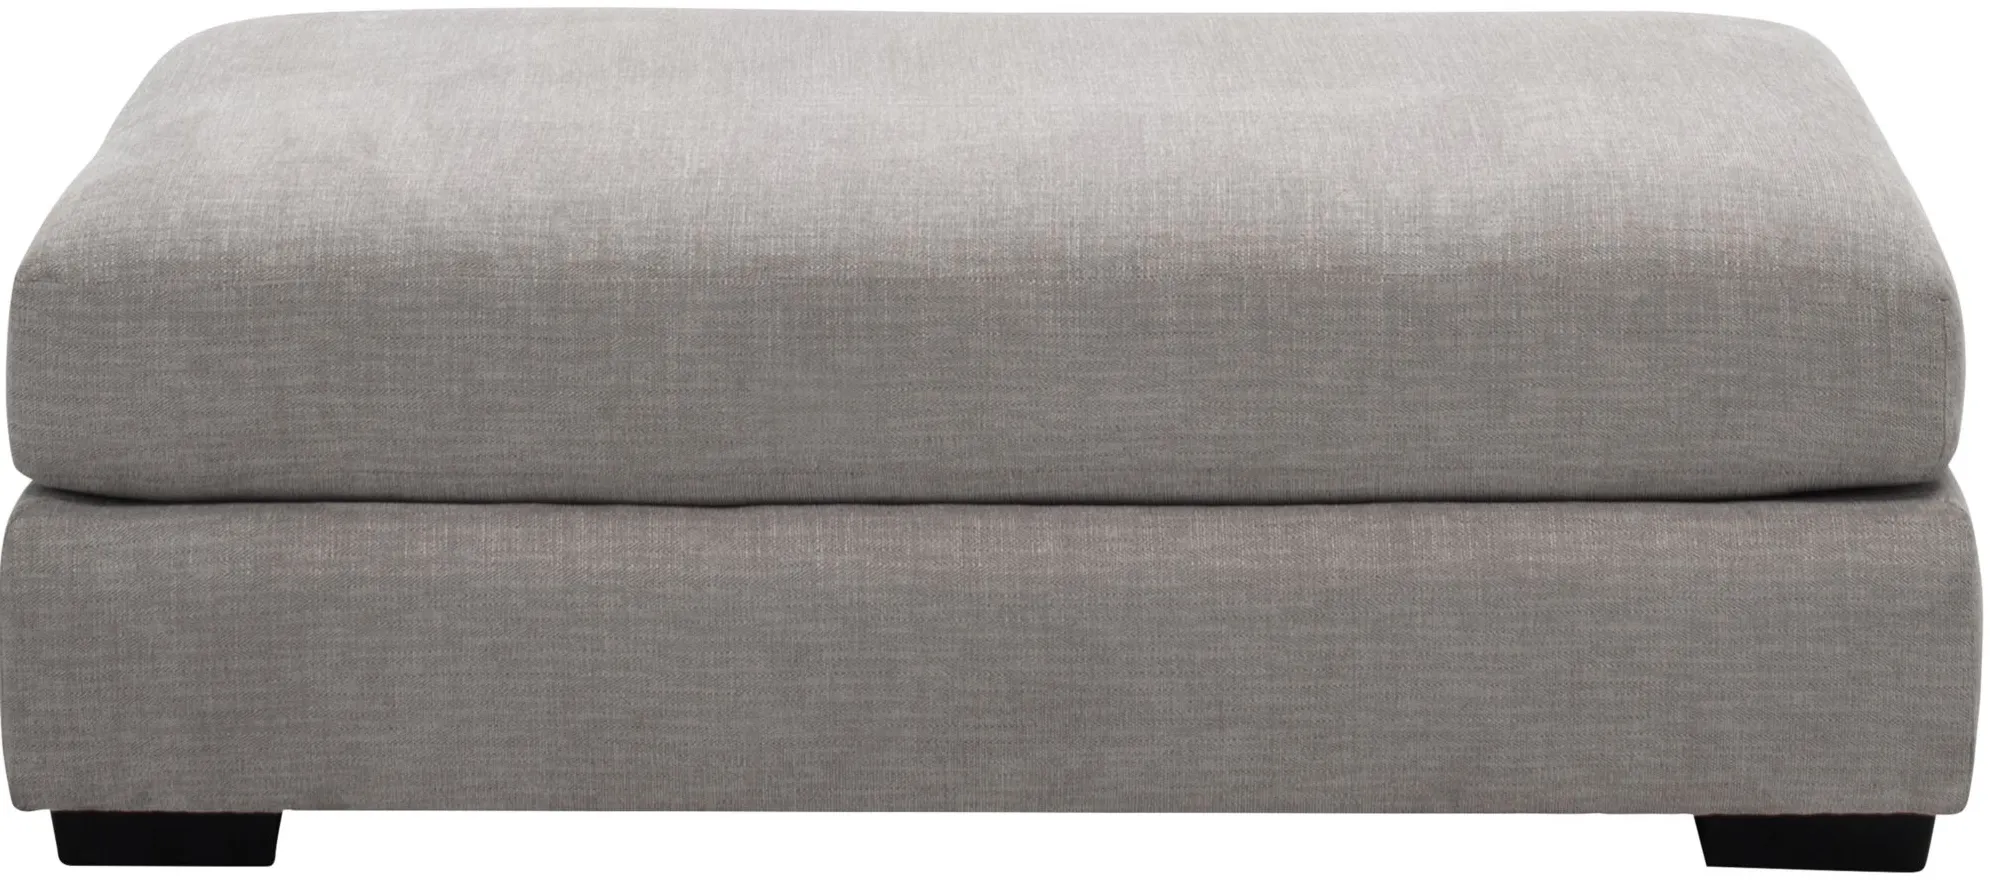 Hendrick Chair Ottoman in Taupe by Style Line